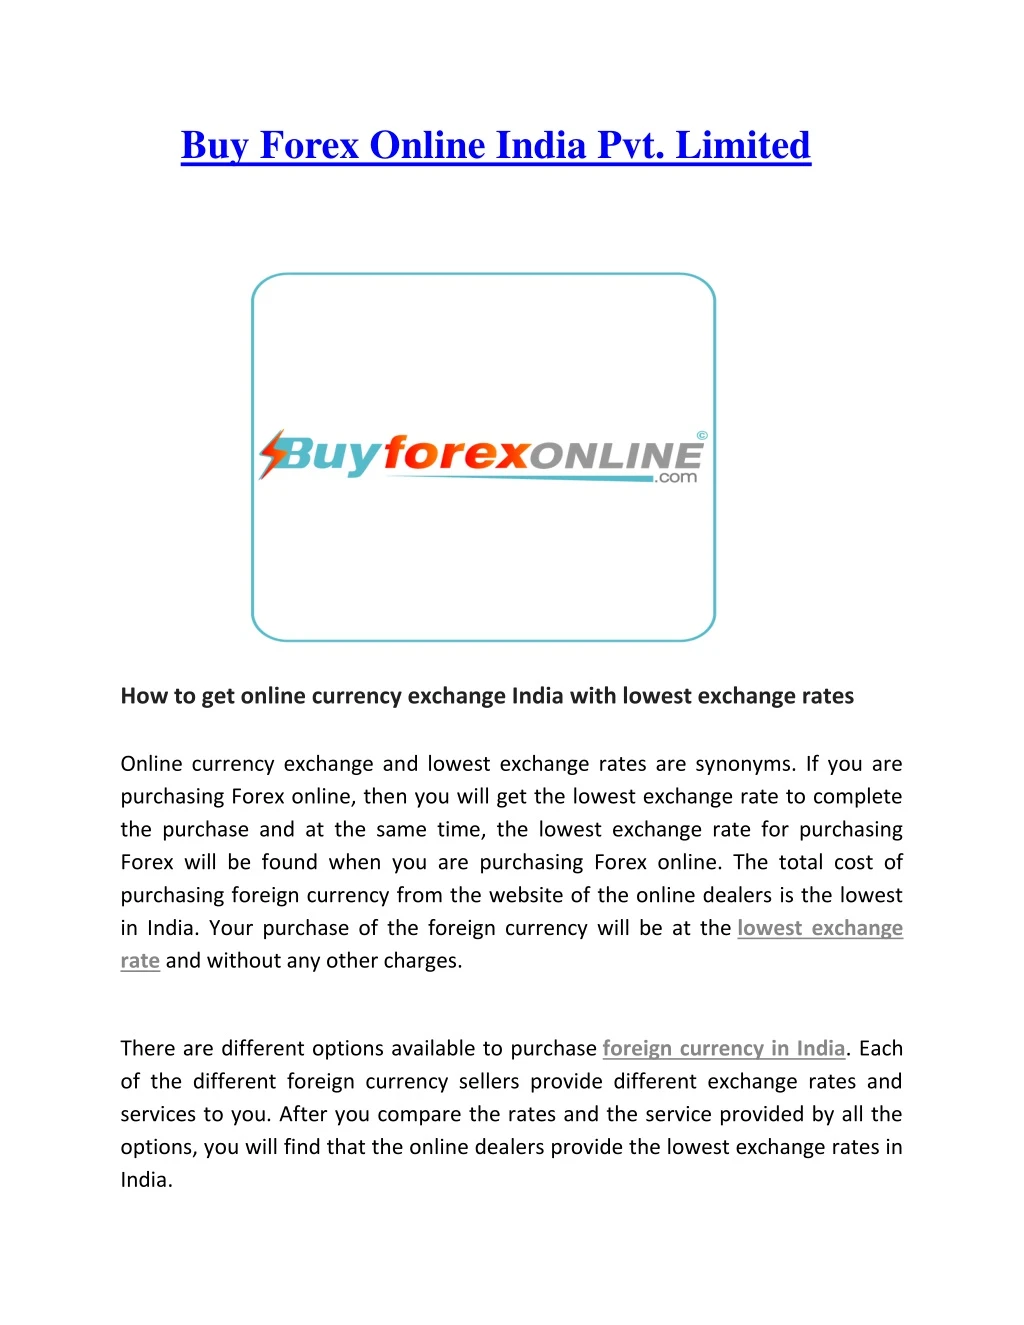 buy forex online india pvt limited